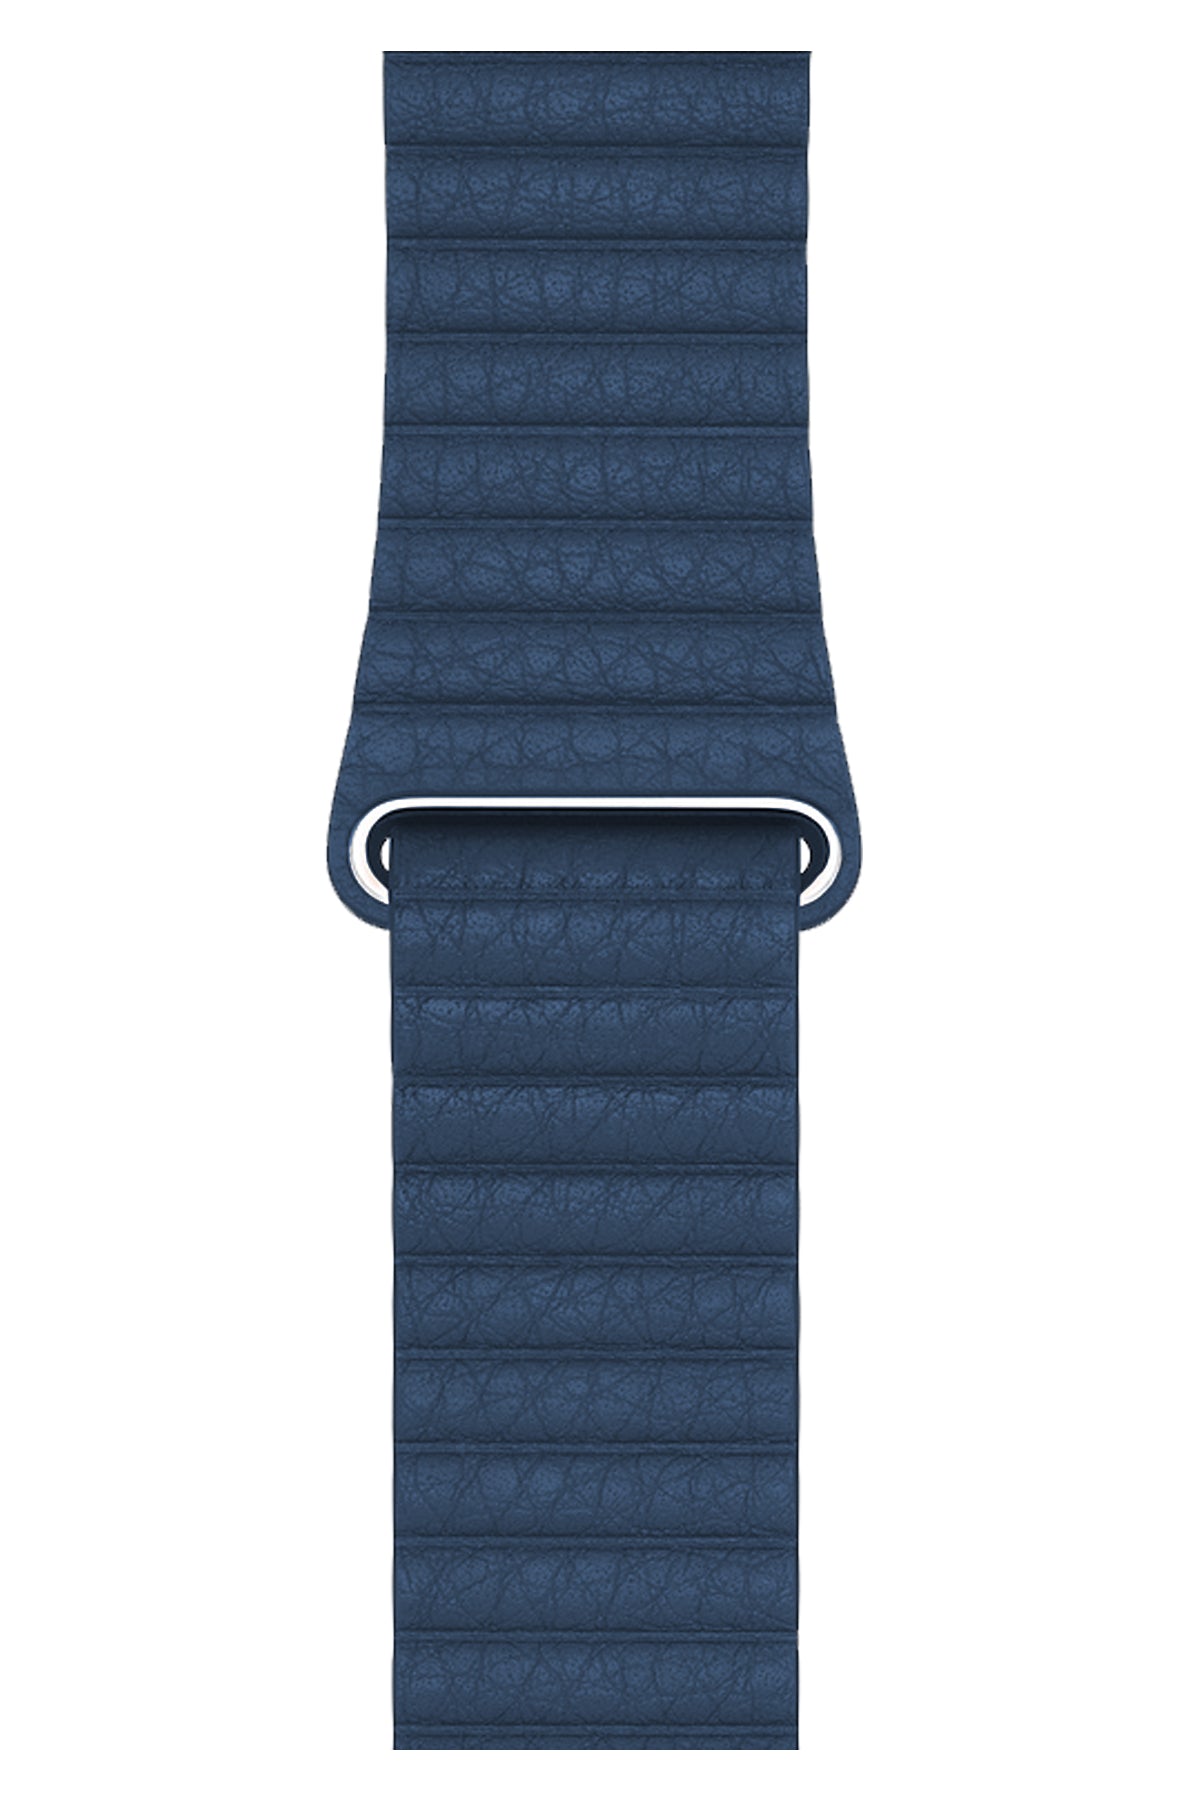 Apple Watch Compatible Leather Loop Band Navy Blue